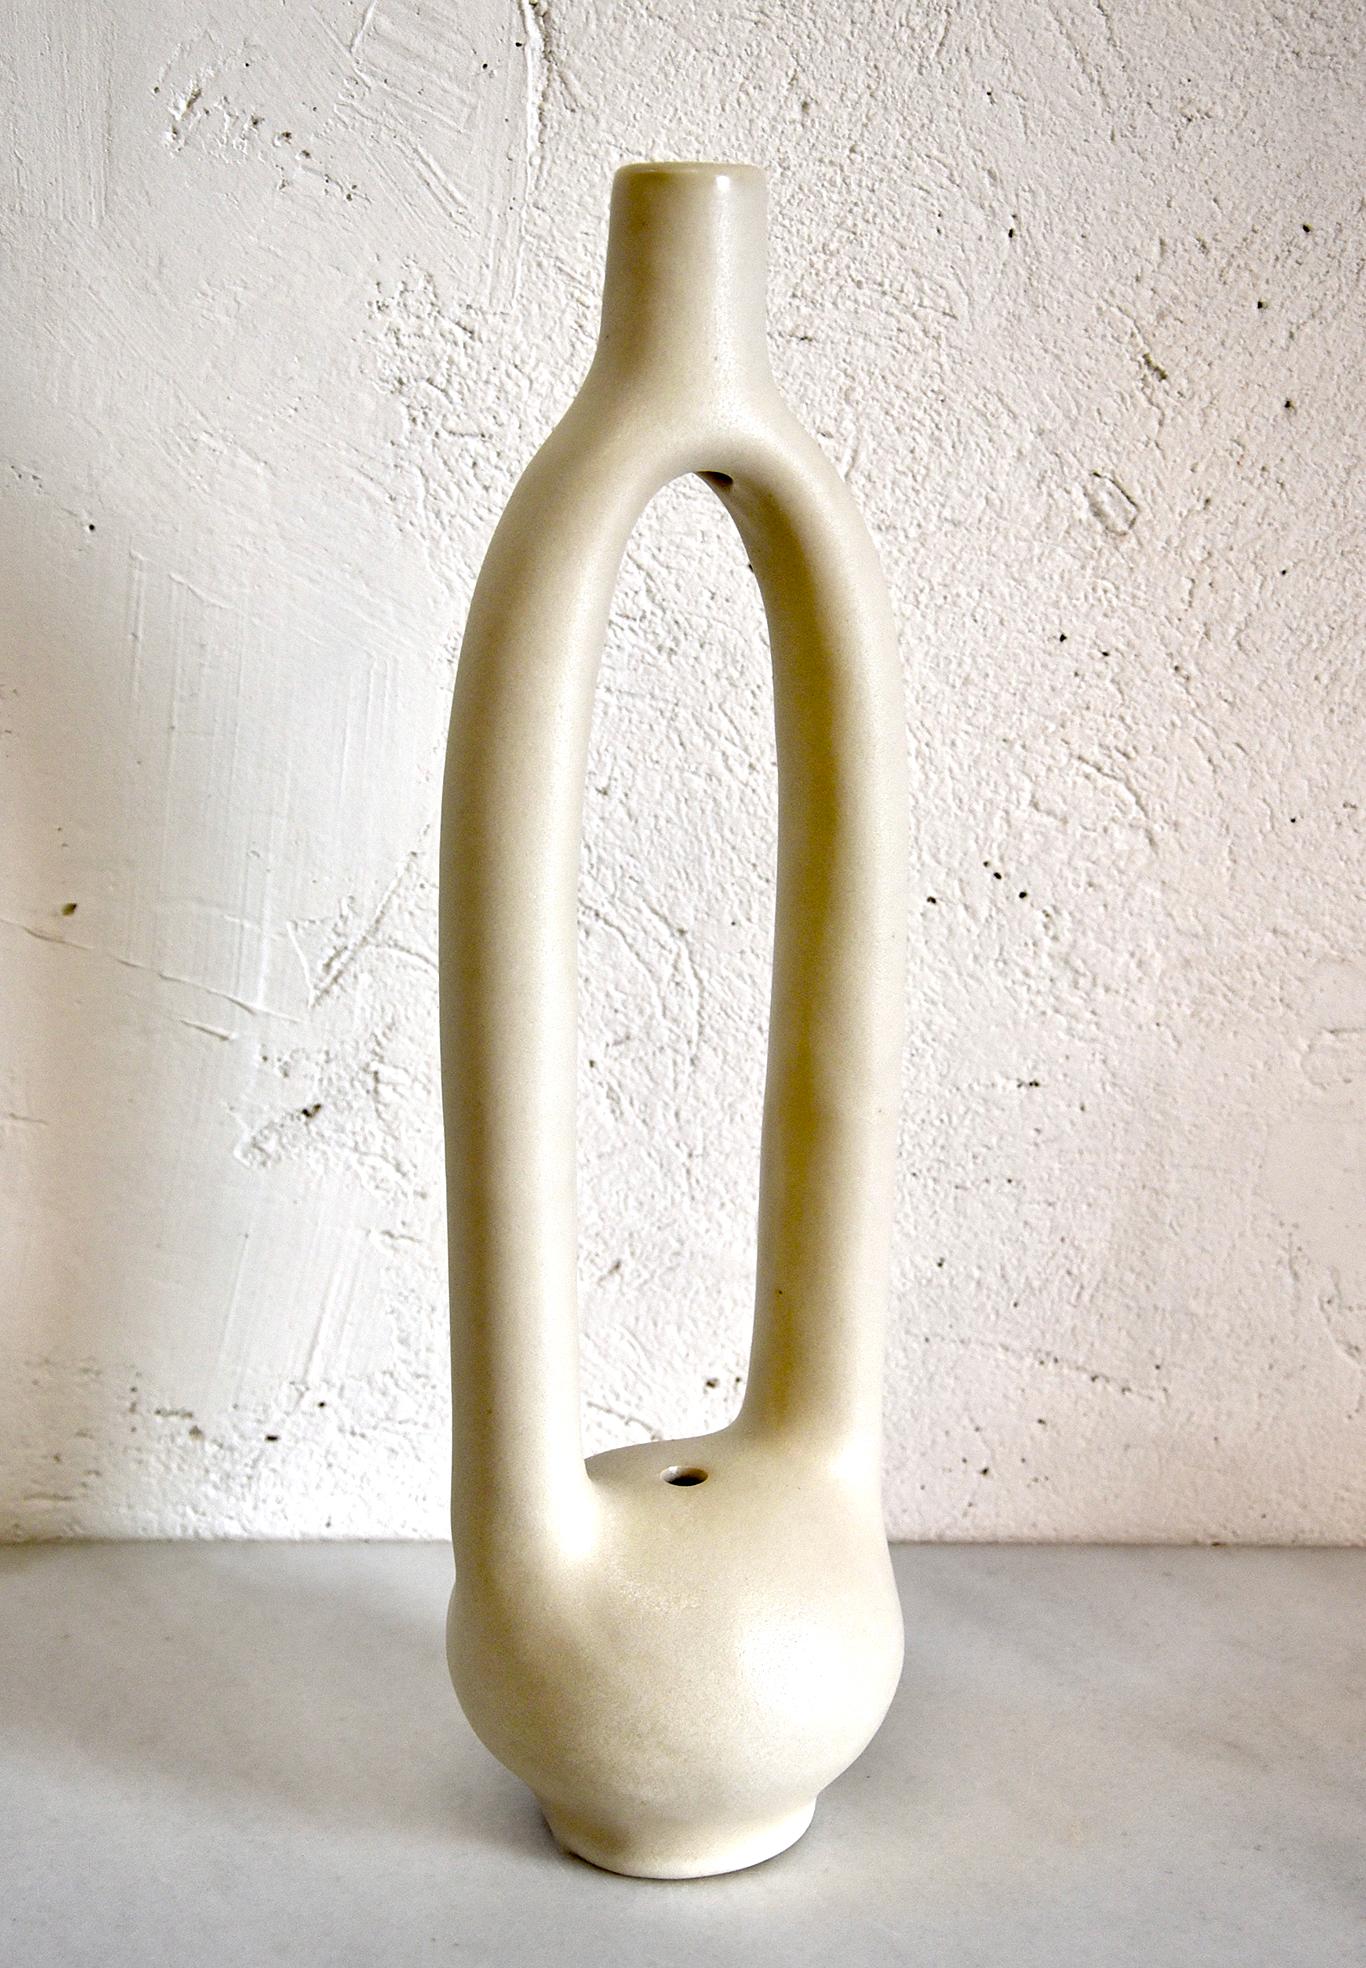 This single stem ceramic vessel by Simone Bodmer-Turner is slip cast in a white stoneware, and finished in a white slip with a satin matte finish.

Simone Bodmer-Turner is a ceramic artist and sculptor working in Brooklyn, New York. 

She